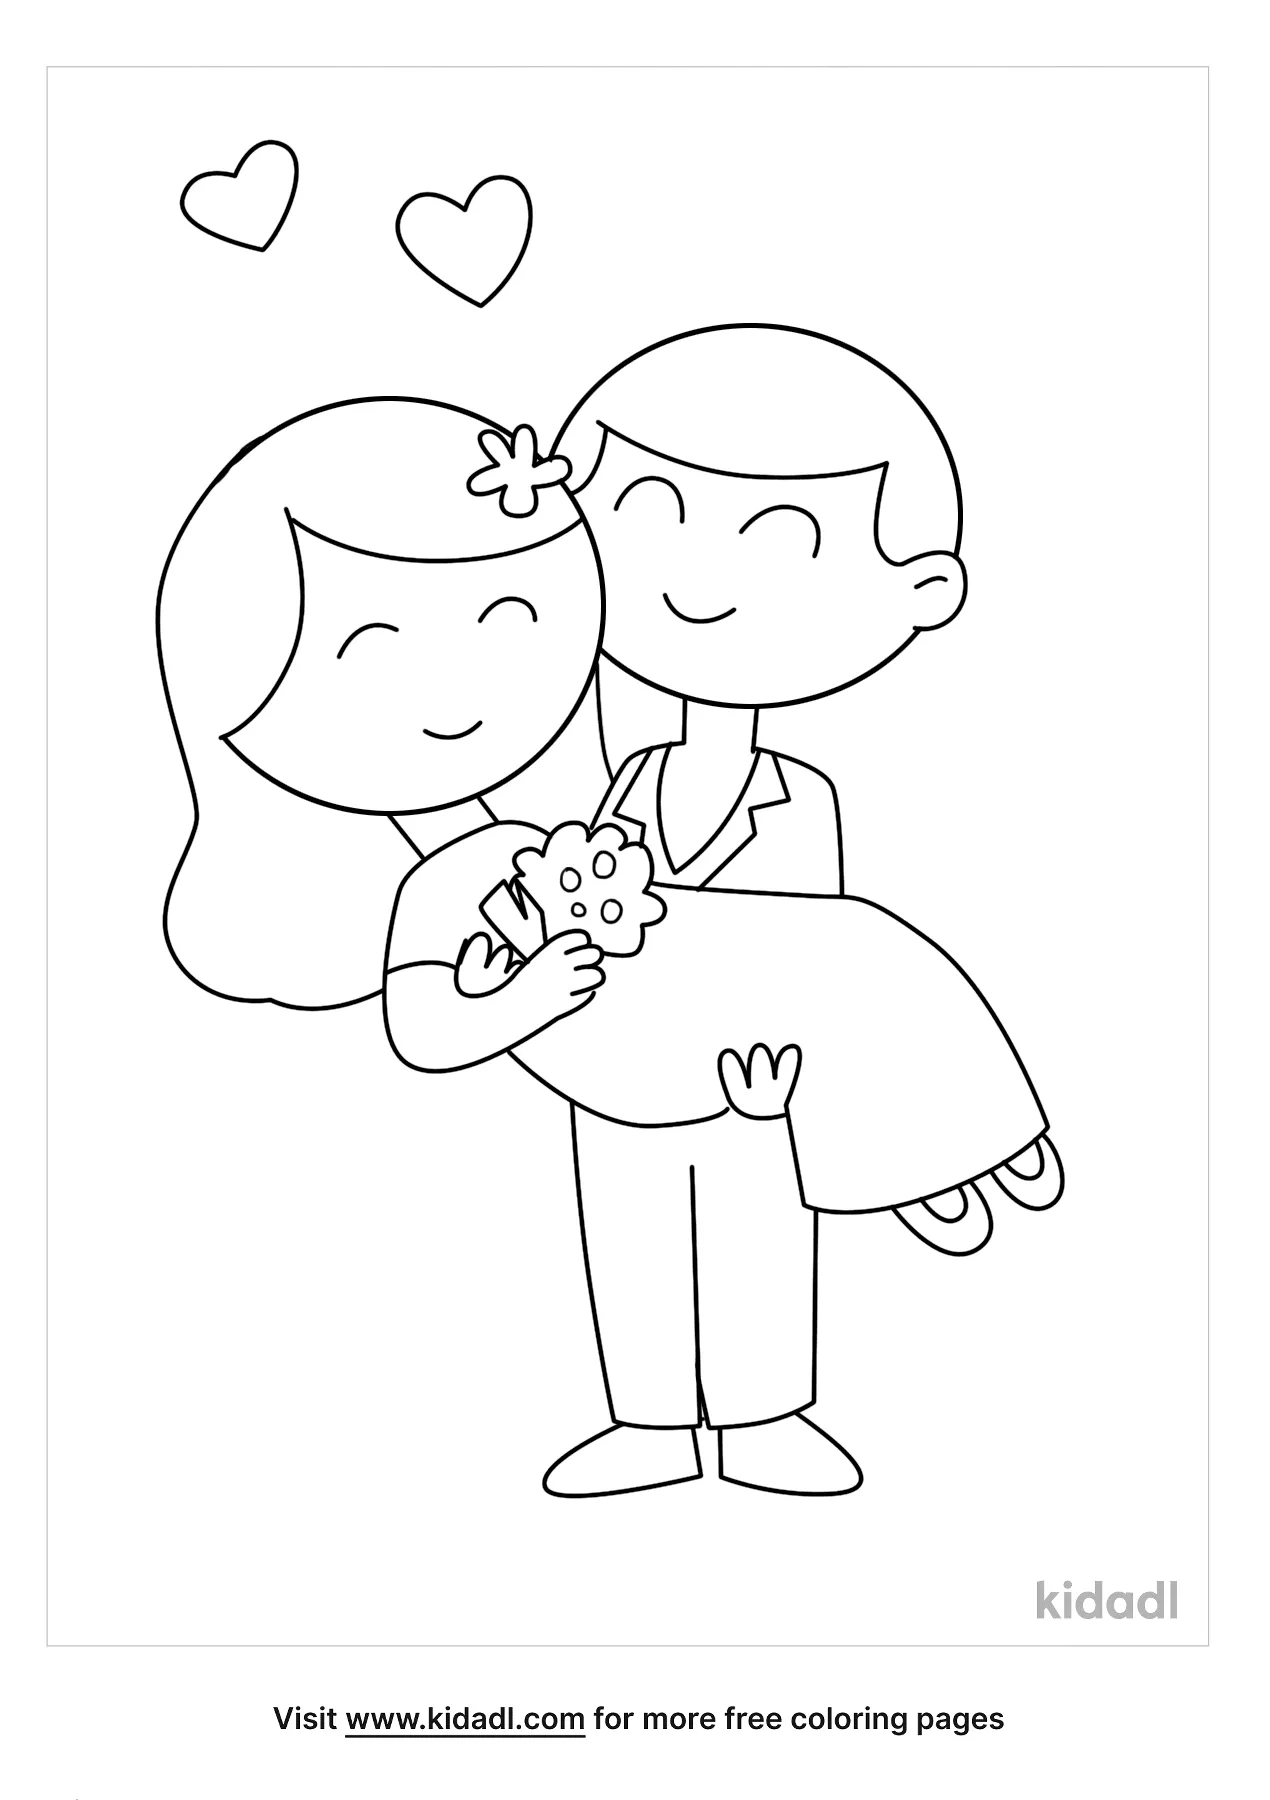 Wedding Coloring Pages   Free Seasonal holidays and celebrations ...